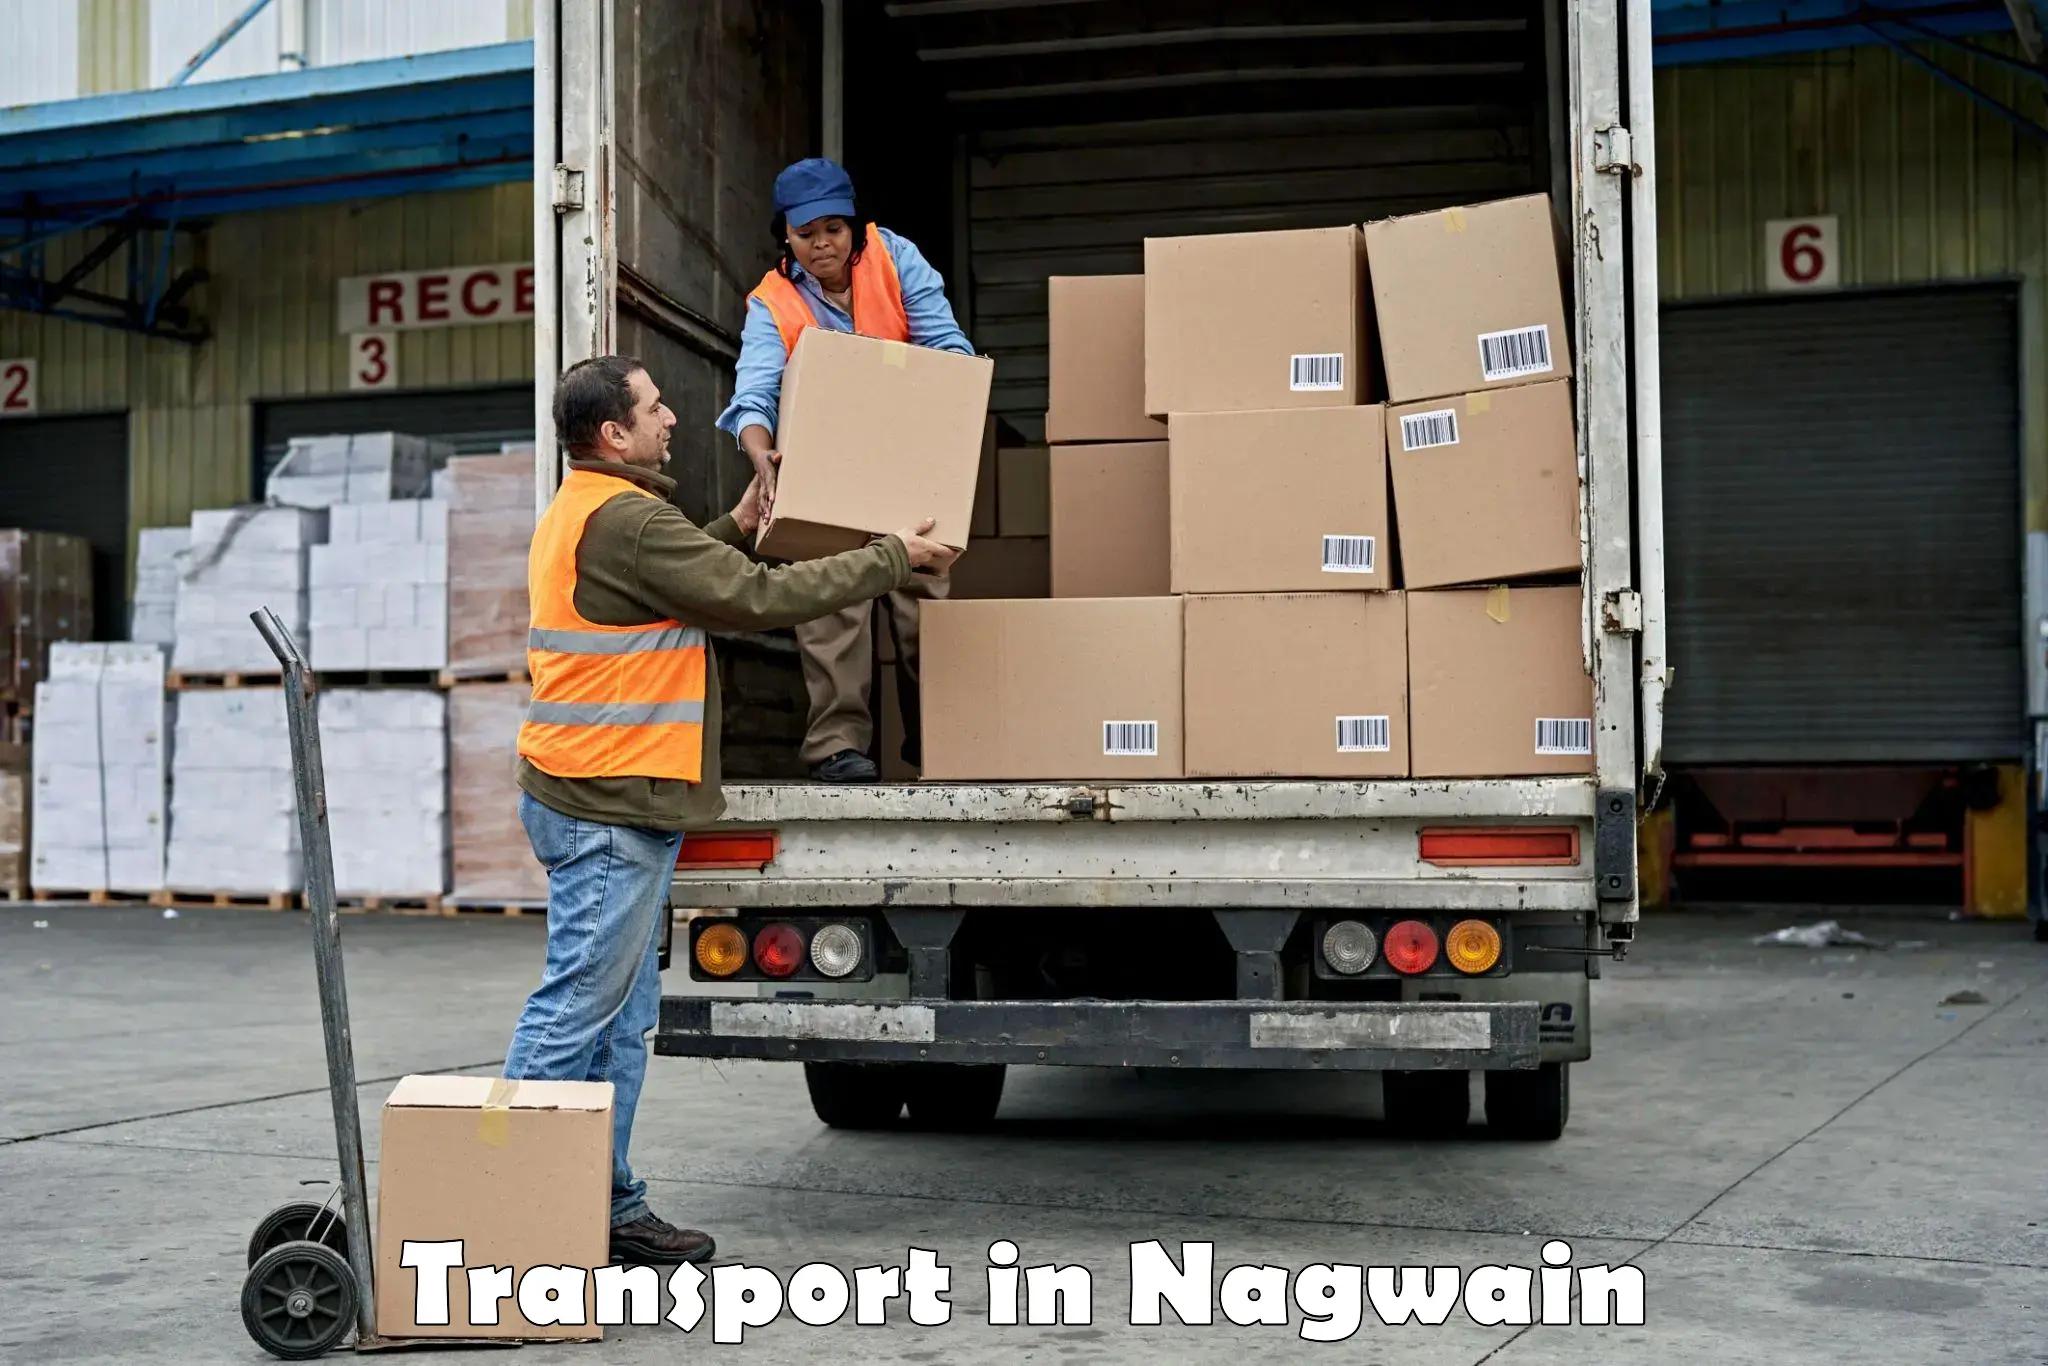 Transport services in Nagwain